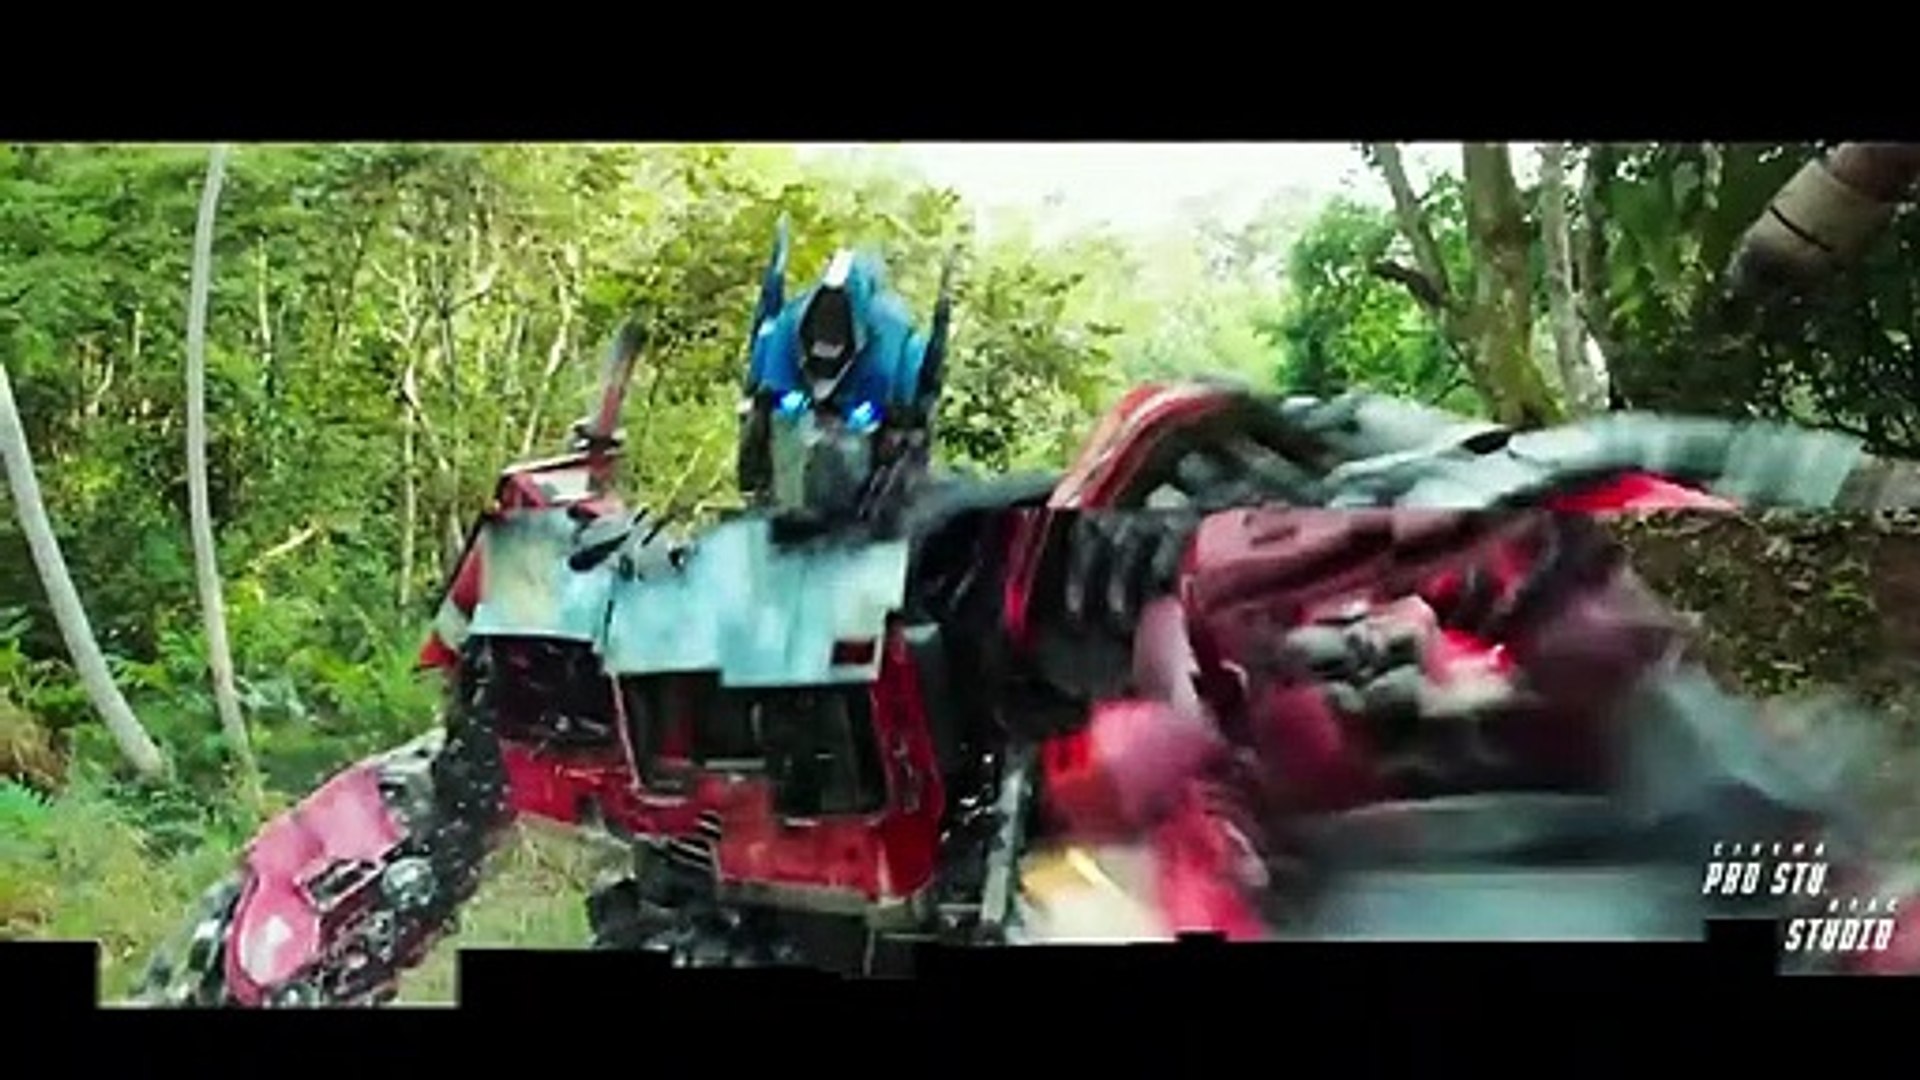 TRANSFORMERS 7: RISE OF THE BEASTS – Final Trailer (2023) Paramount  Pictures (New) (HD) 